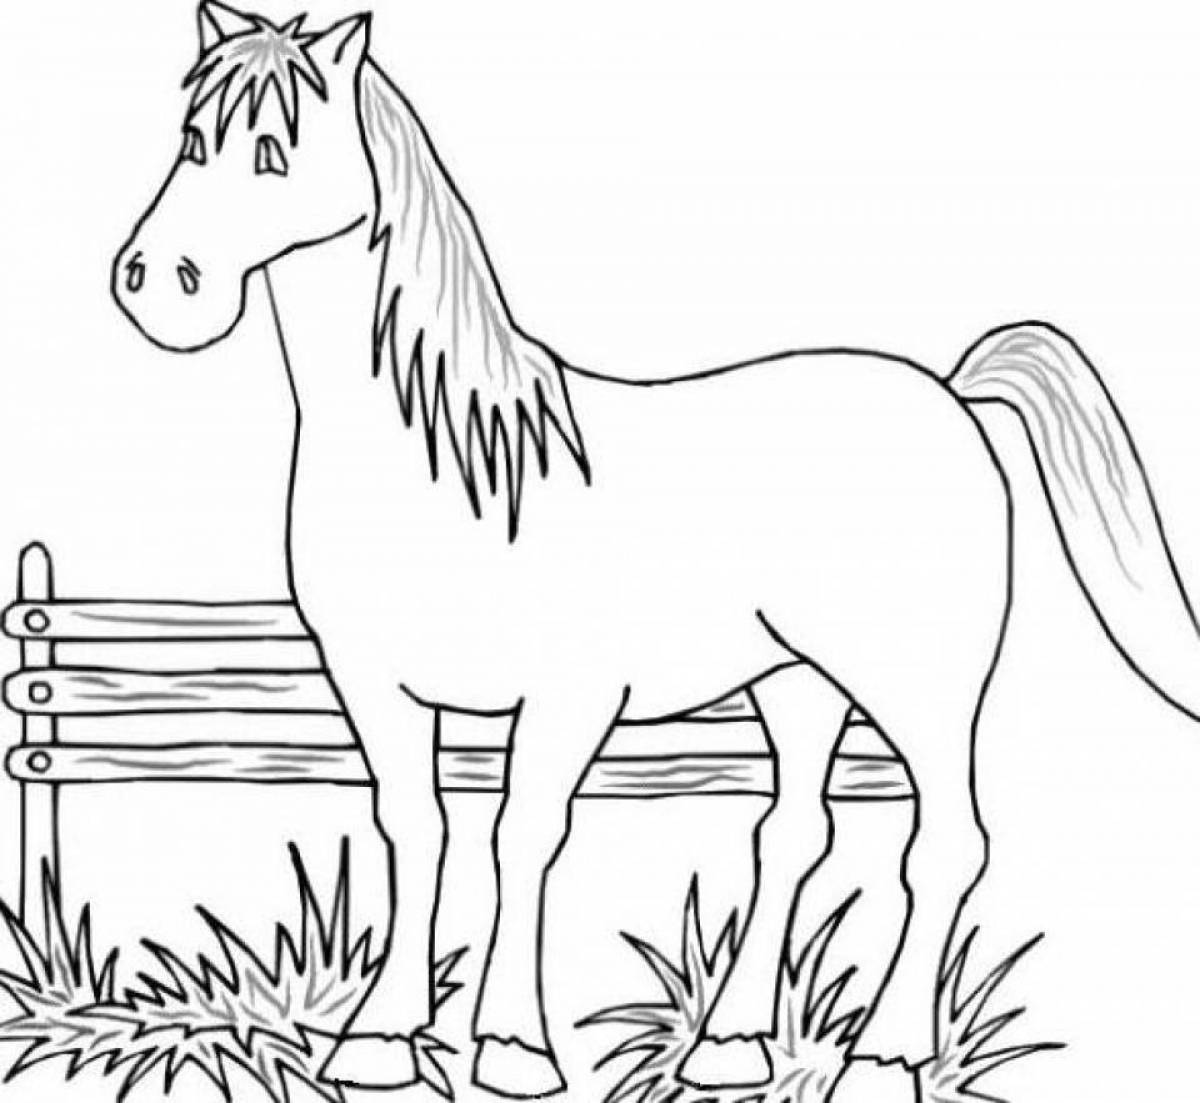 Exquisite pet coloring book for 4-5 year olds